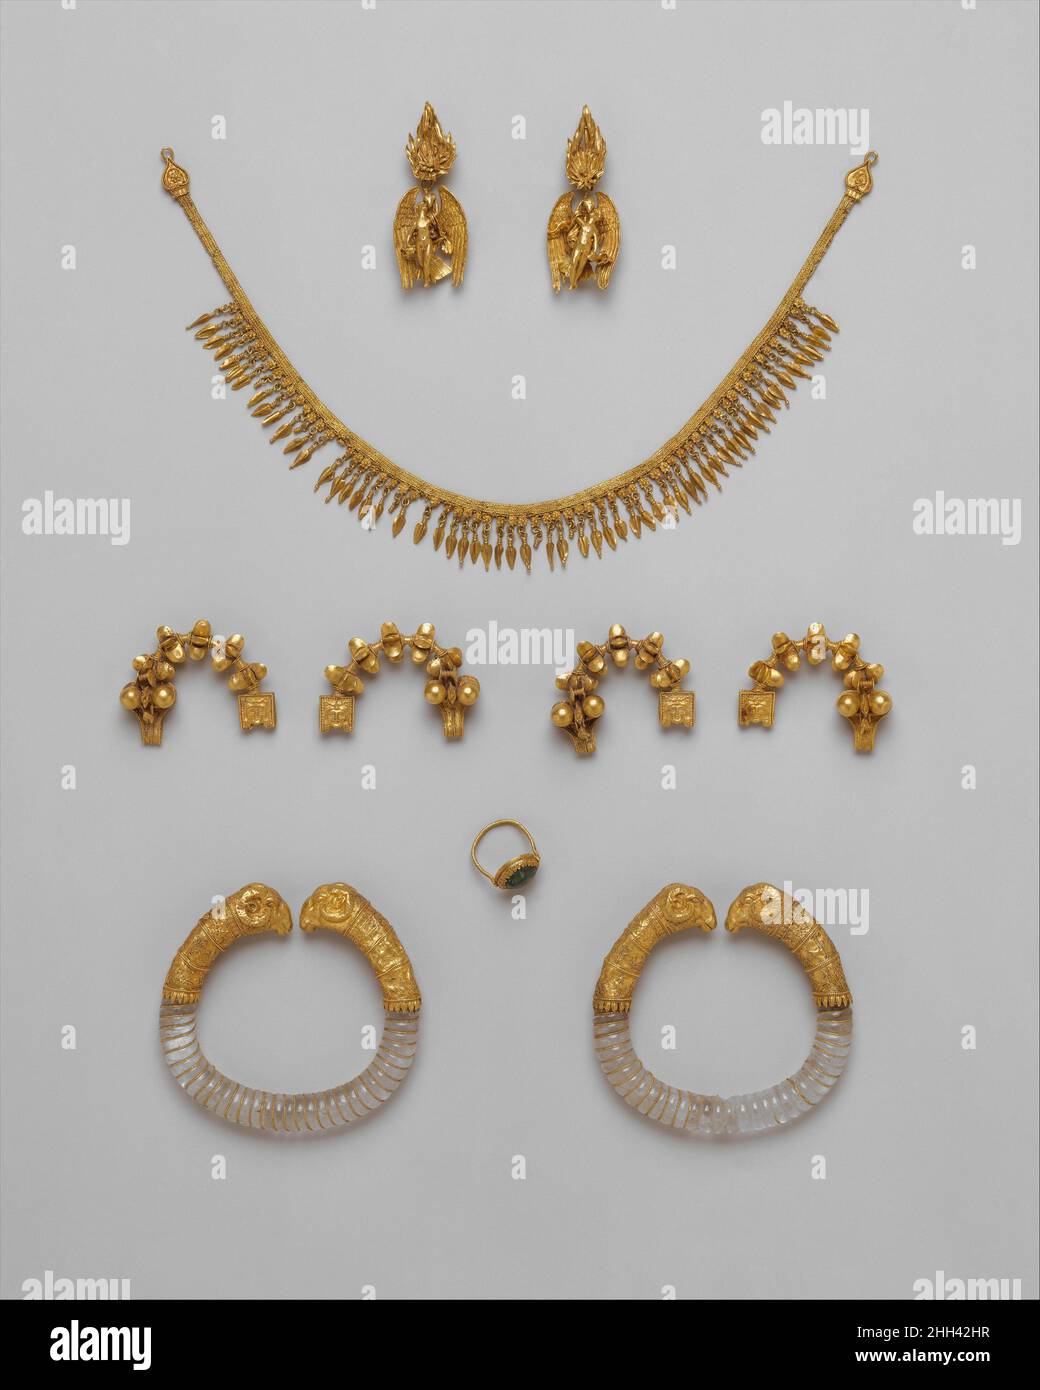 Ganymede jewelry ca. 330–300 B.C. Greek The pieces in this group are said to have been found together in Macedonia, near Thessaloniki, before 1913. The assemblage forms an impressive parure (matched set) - earrings, necklace, fibulae (pins), bracelets, and a ring - but it is not certain that they belong together, for the pieces do not show a clear uniformity of style.The gold strap necklace, dated circa 300 B.C., is made of three double loop-in-loop chains with double interlinking and a fringe of beechnut pendants. The terminals take the form of an ivy or grape leaf and have a border of beaded Stock Photo